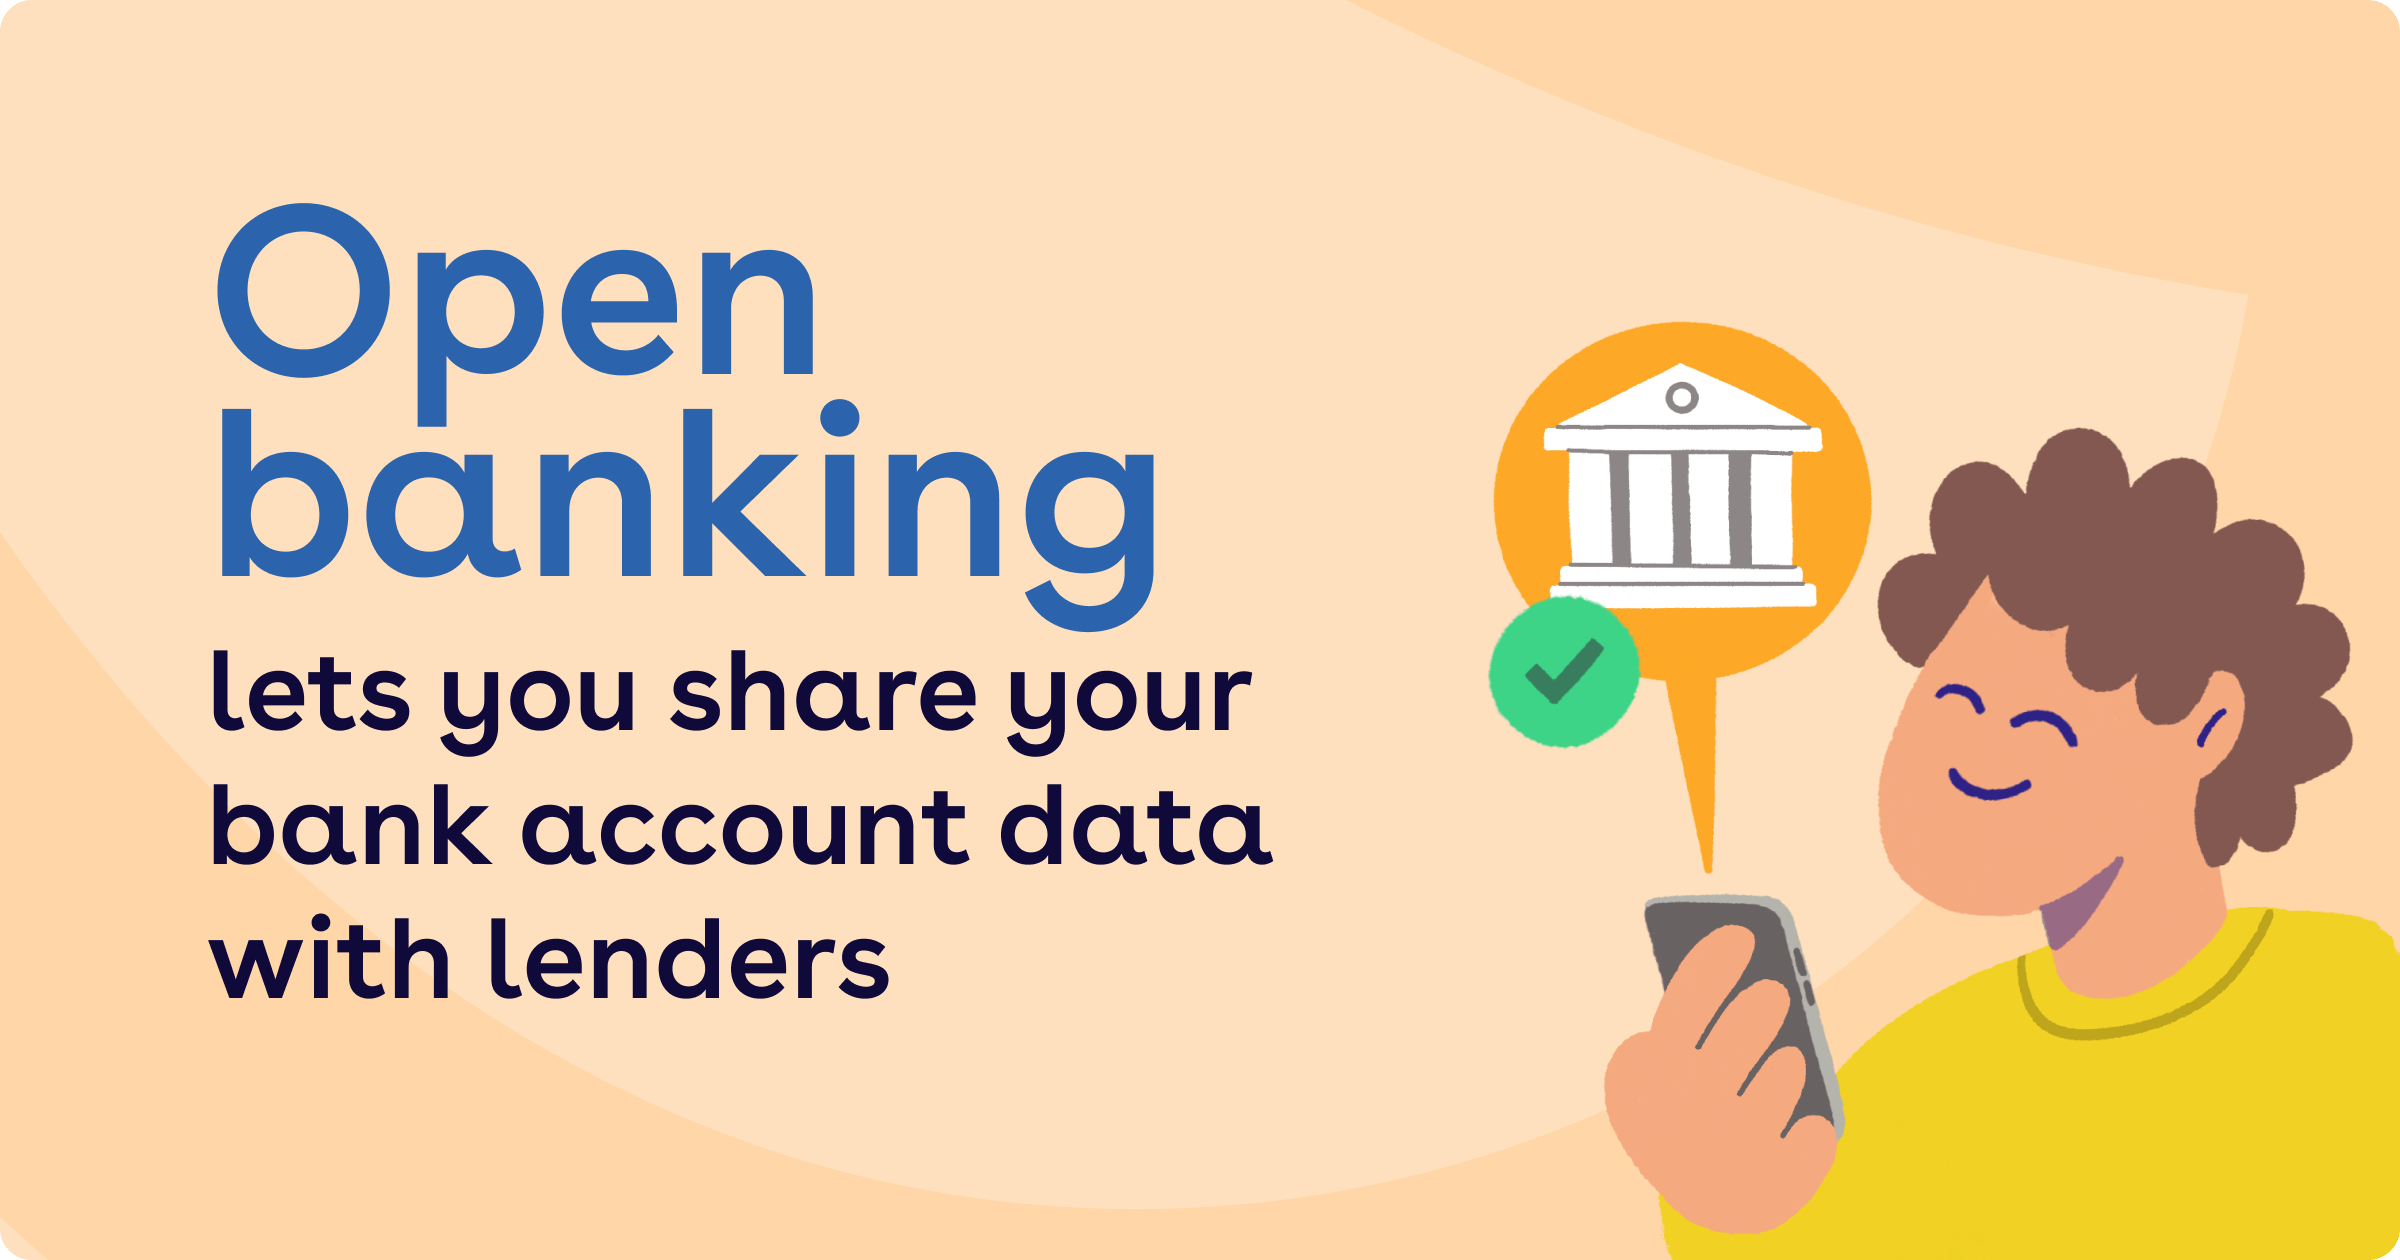 Open banking let's you share your bank account data with lenders